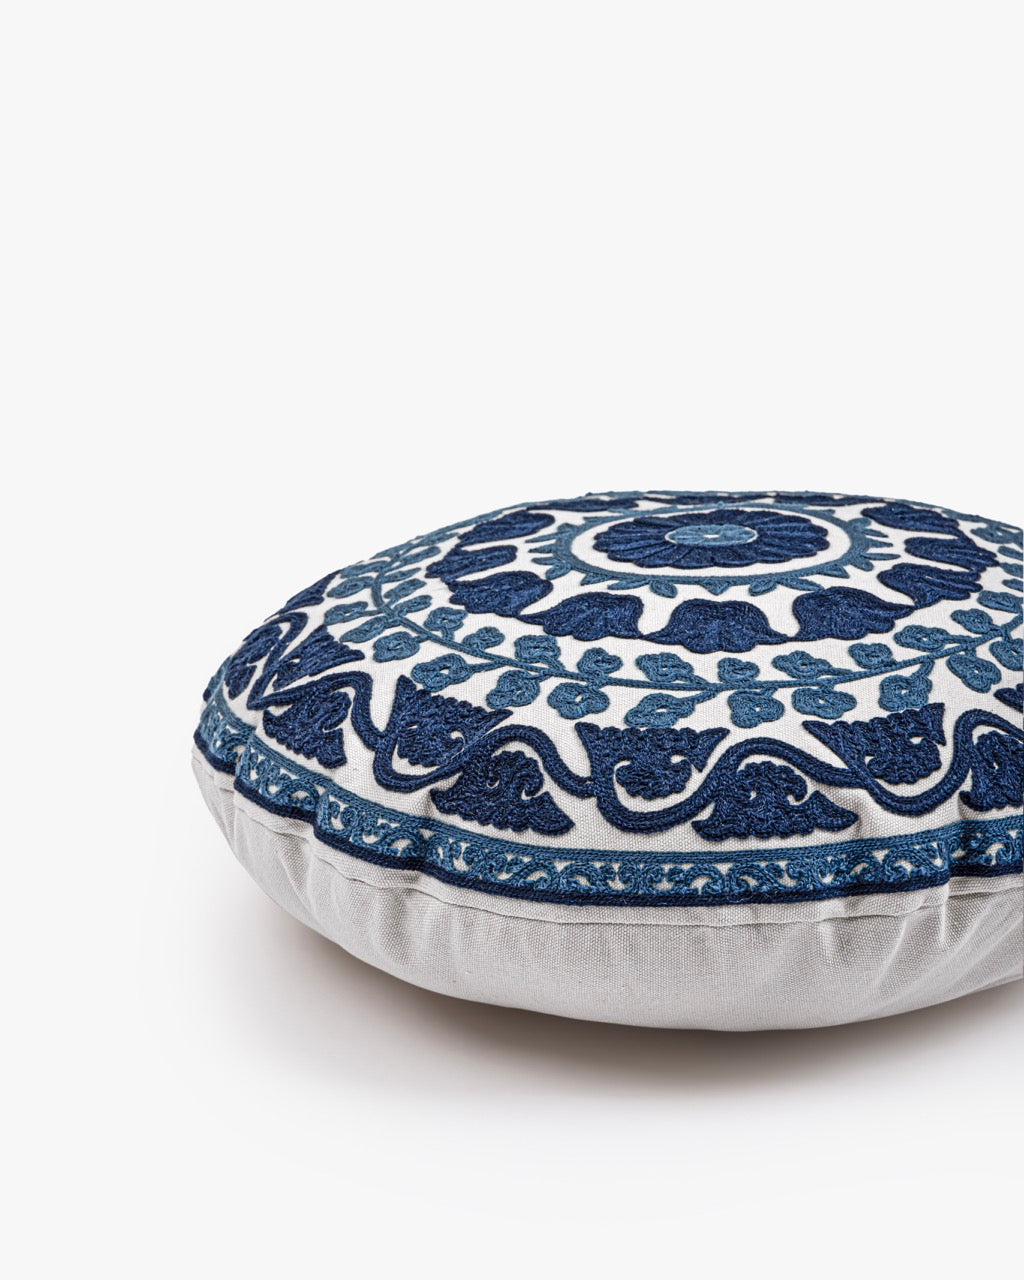 Suzani Pillow | Blue Pillow Cover Flora 16" Round | Made in Jaipur